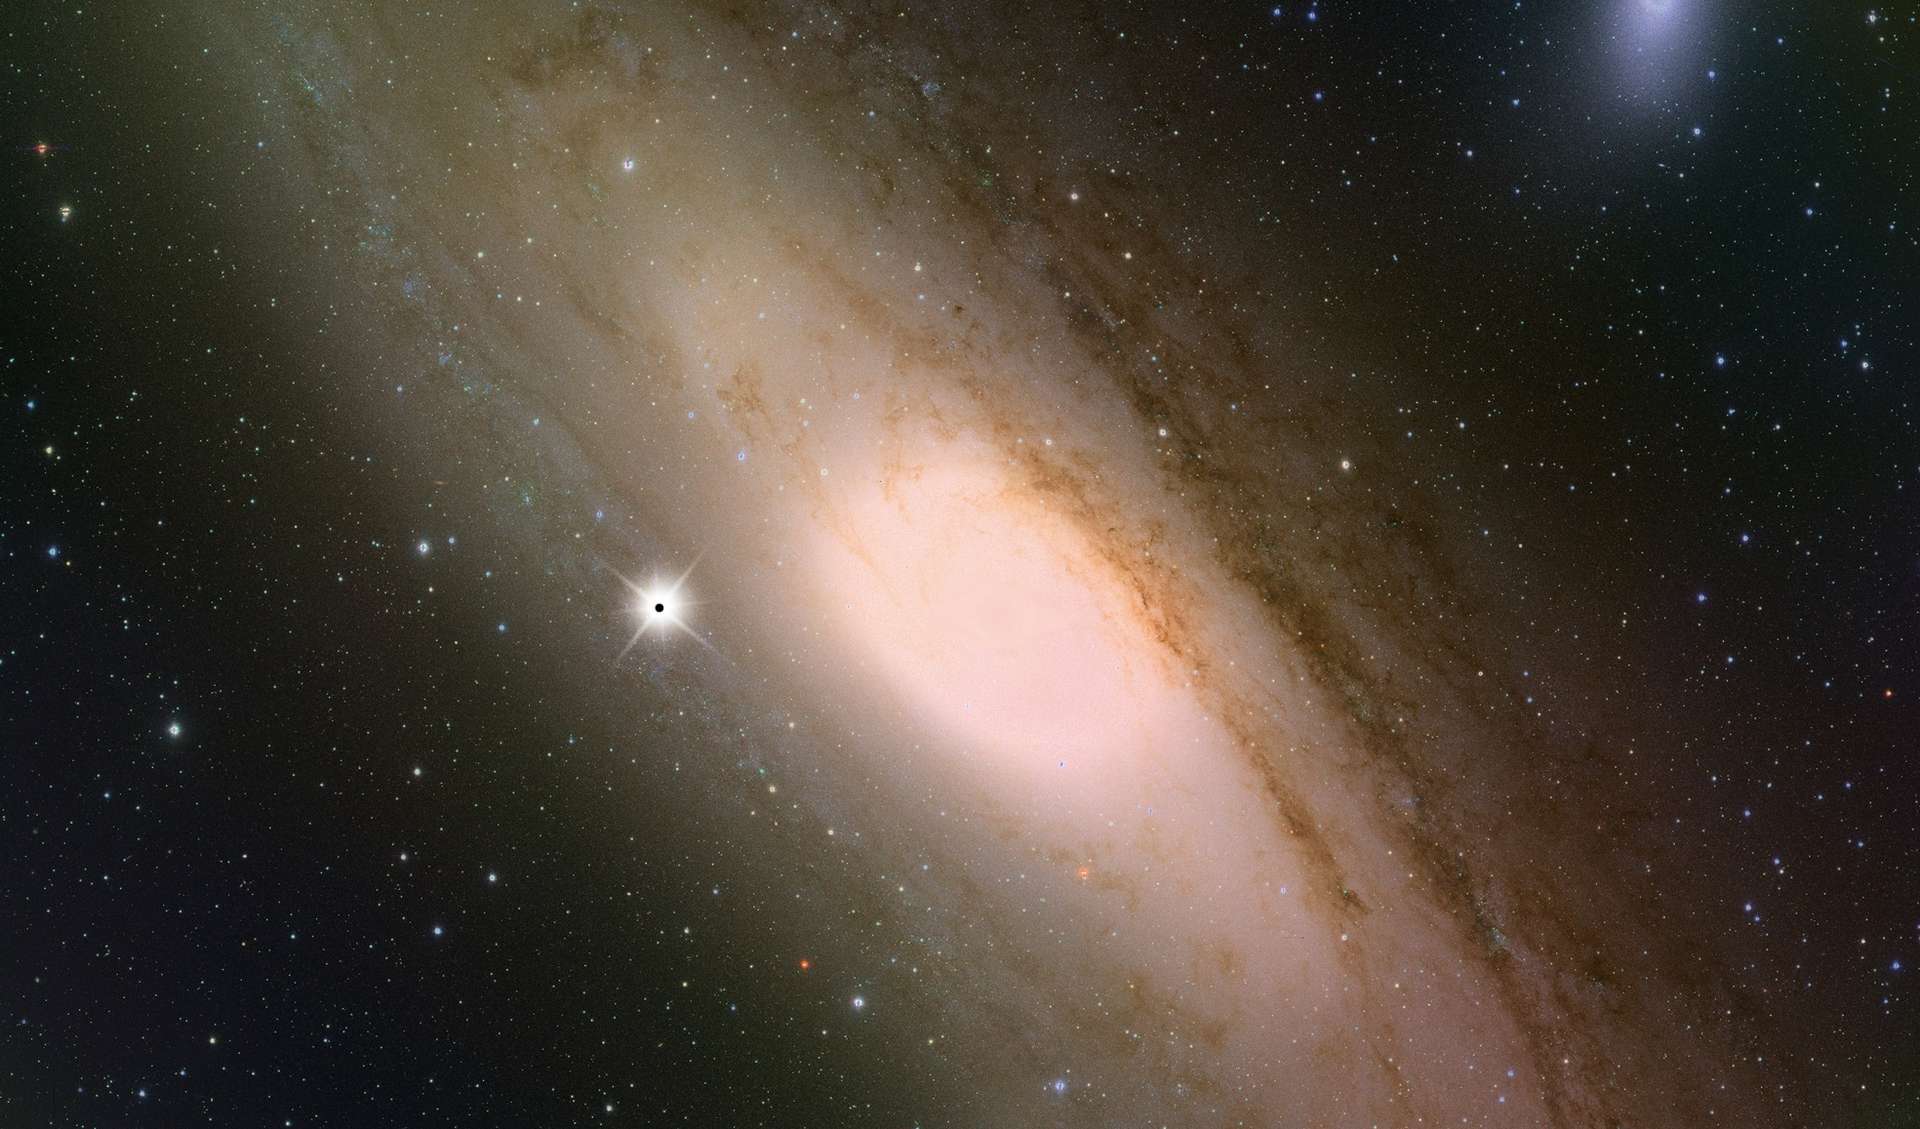 Help astronomers discover millions of stellar black holes hidden in the Milky Way!